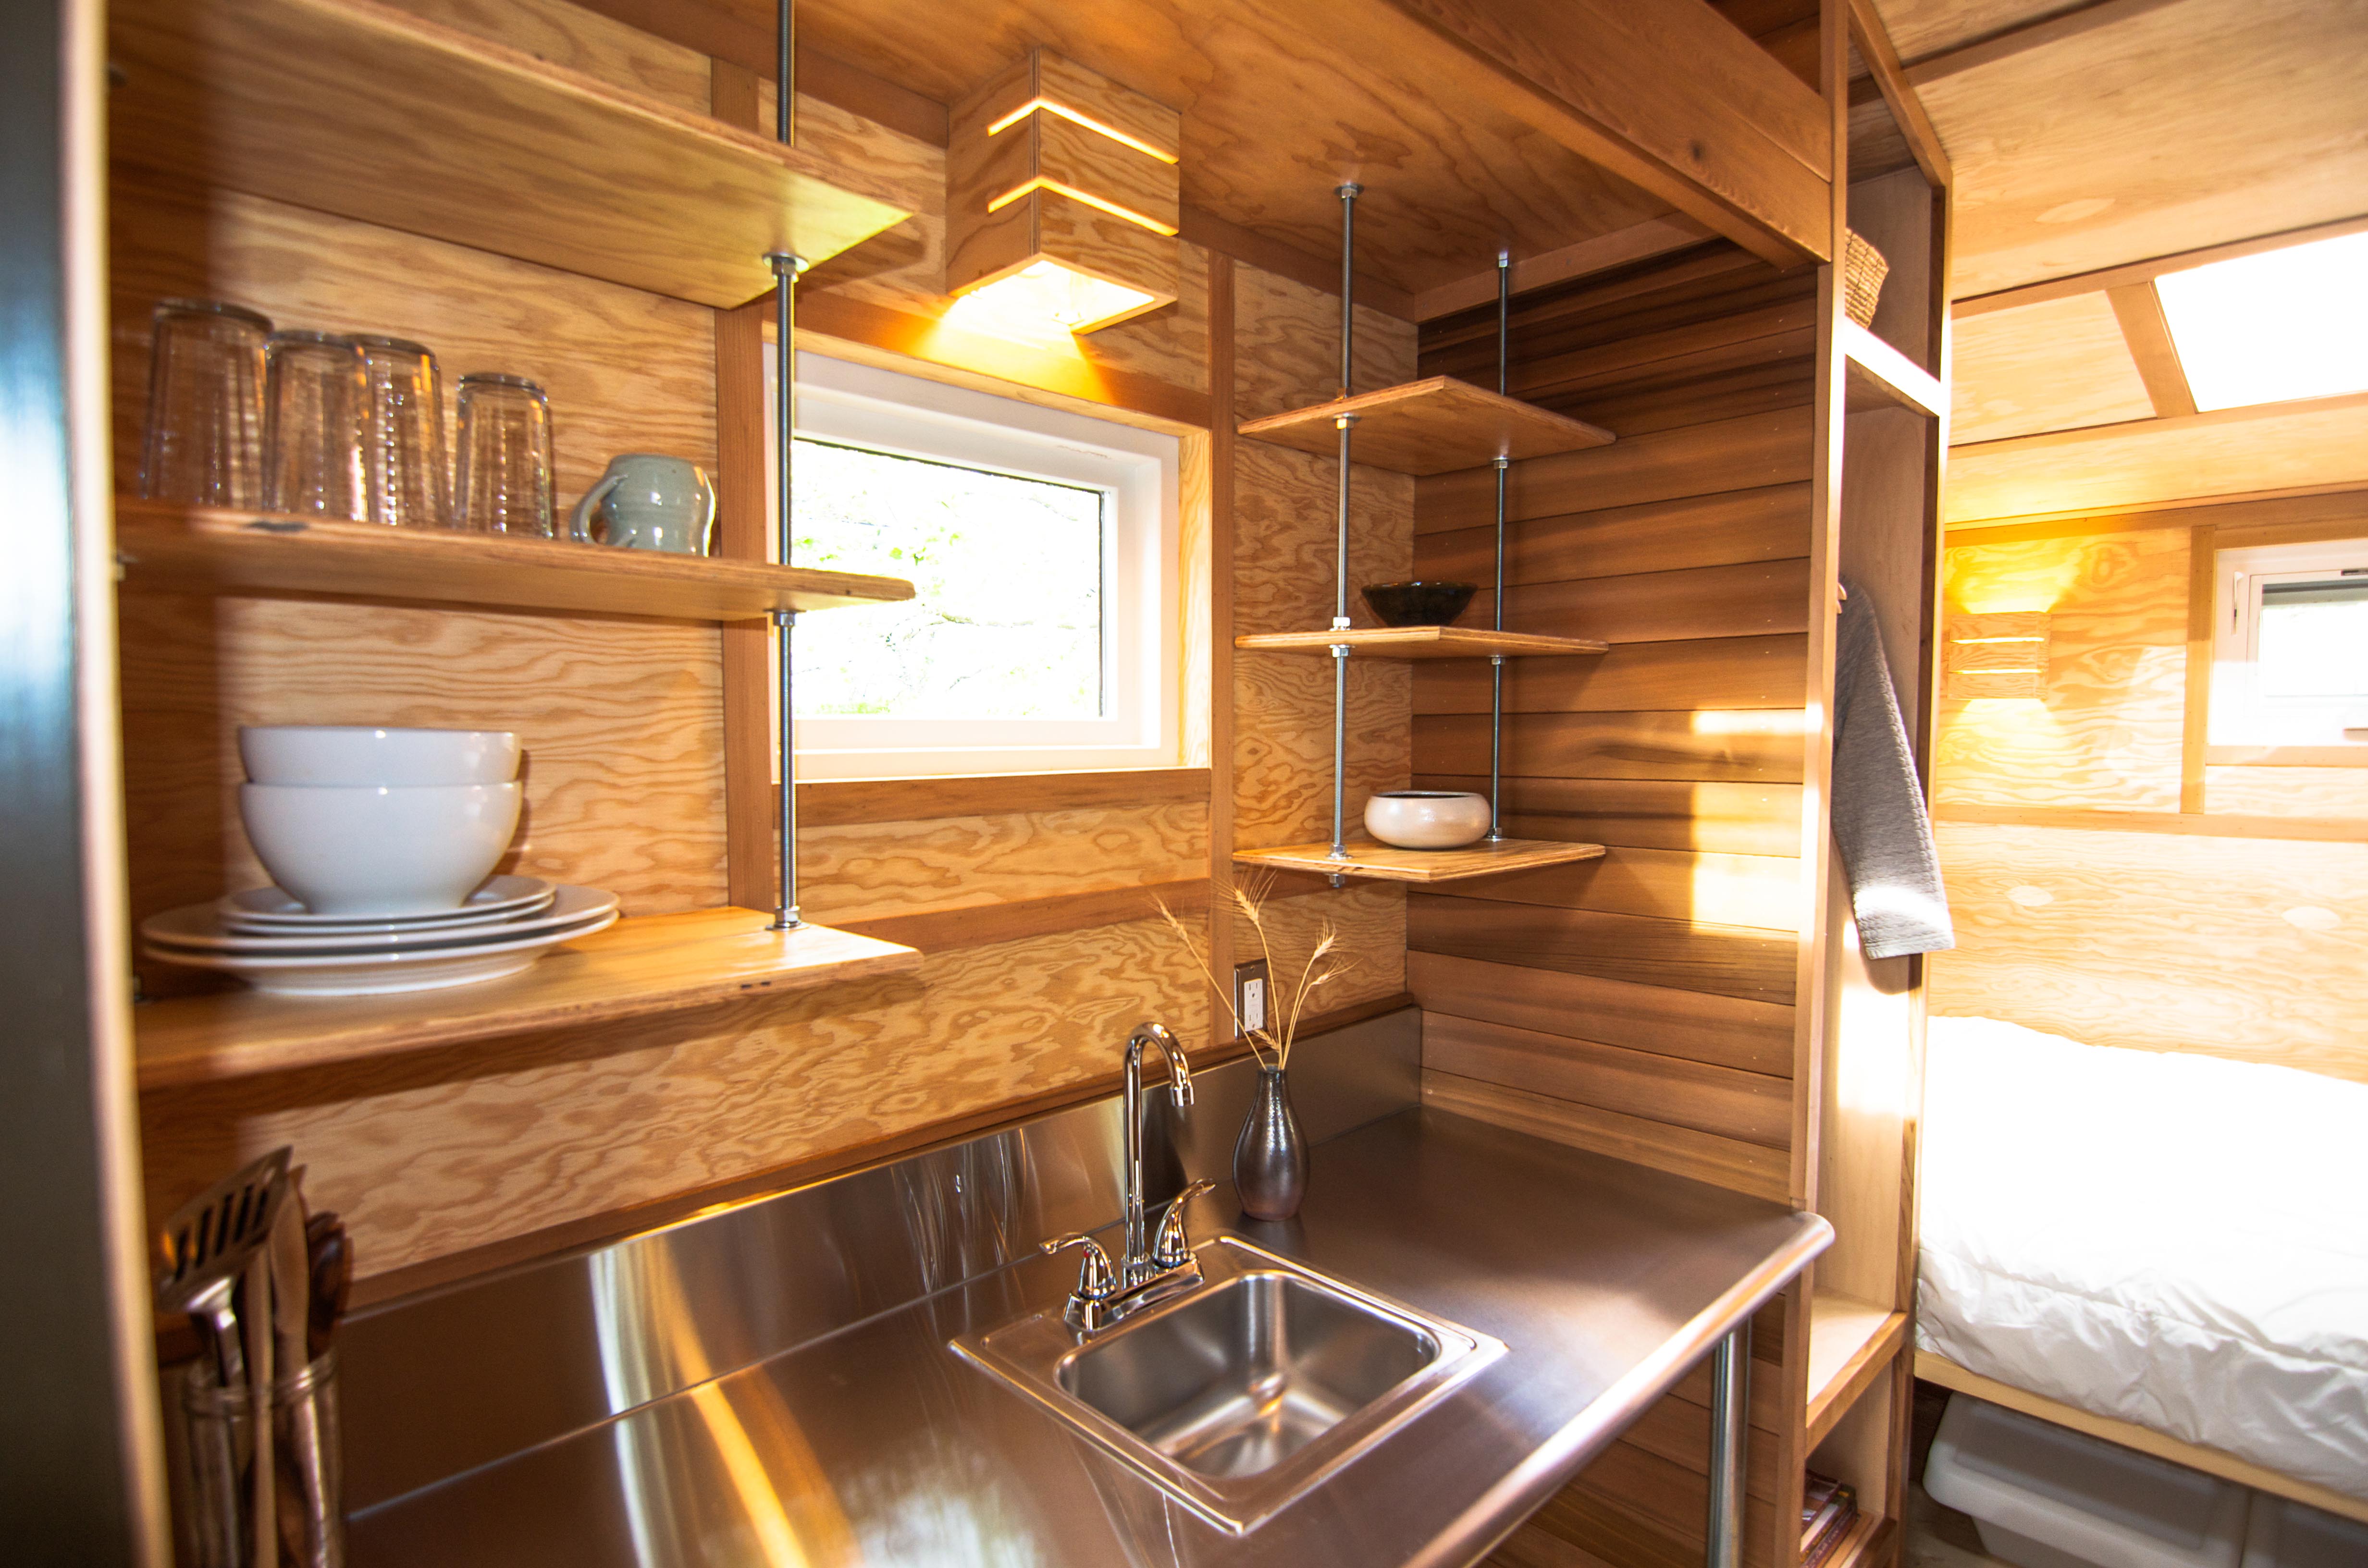 An Affordable Tiny House Design to Take Off the Grid or ...